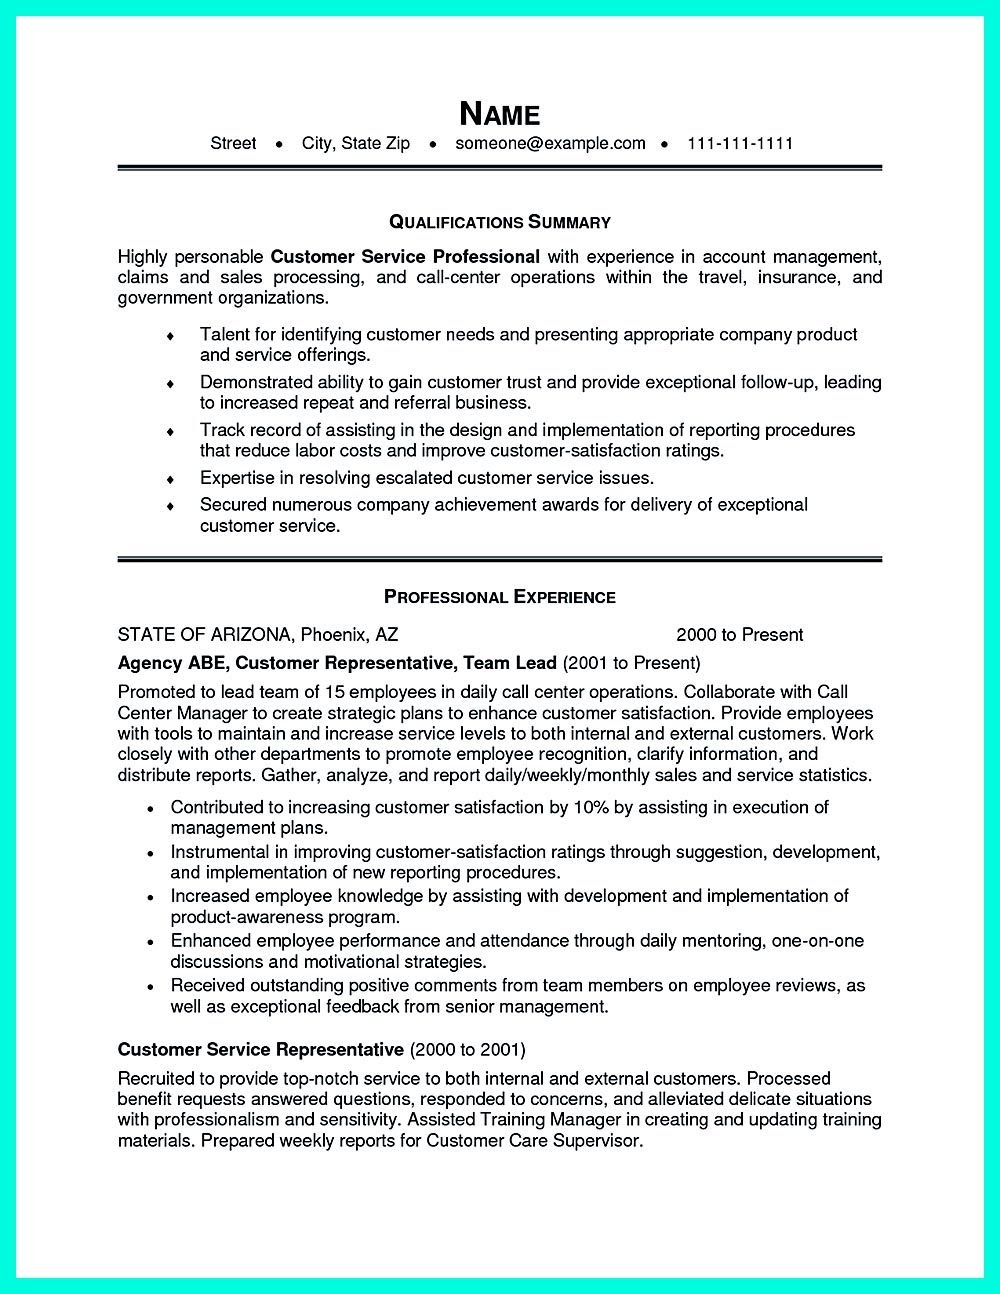 skills summary for resume examples